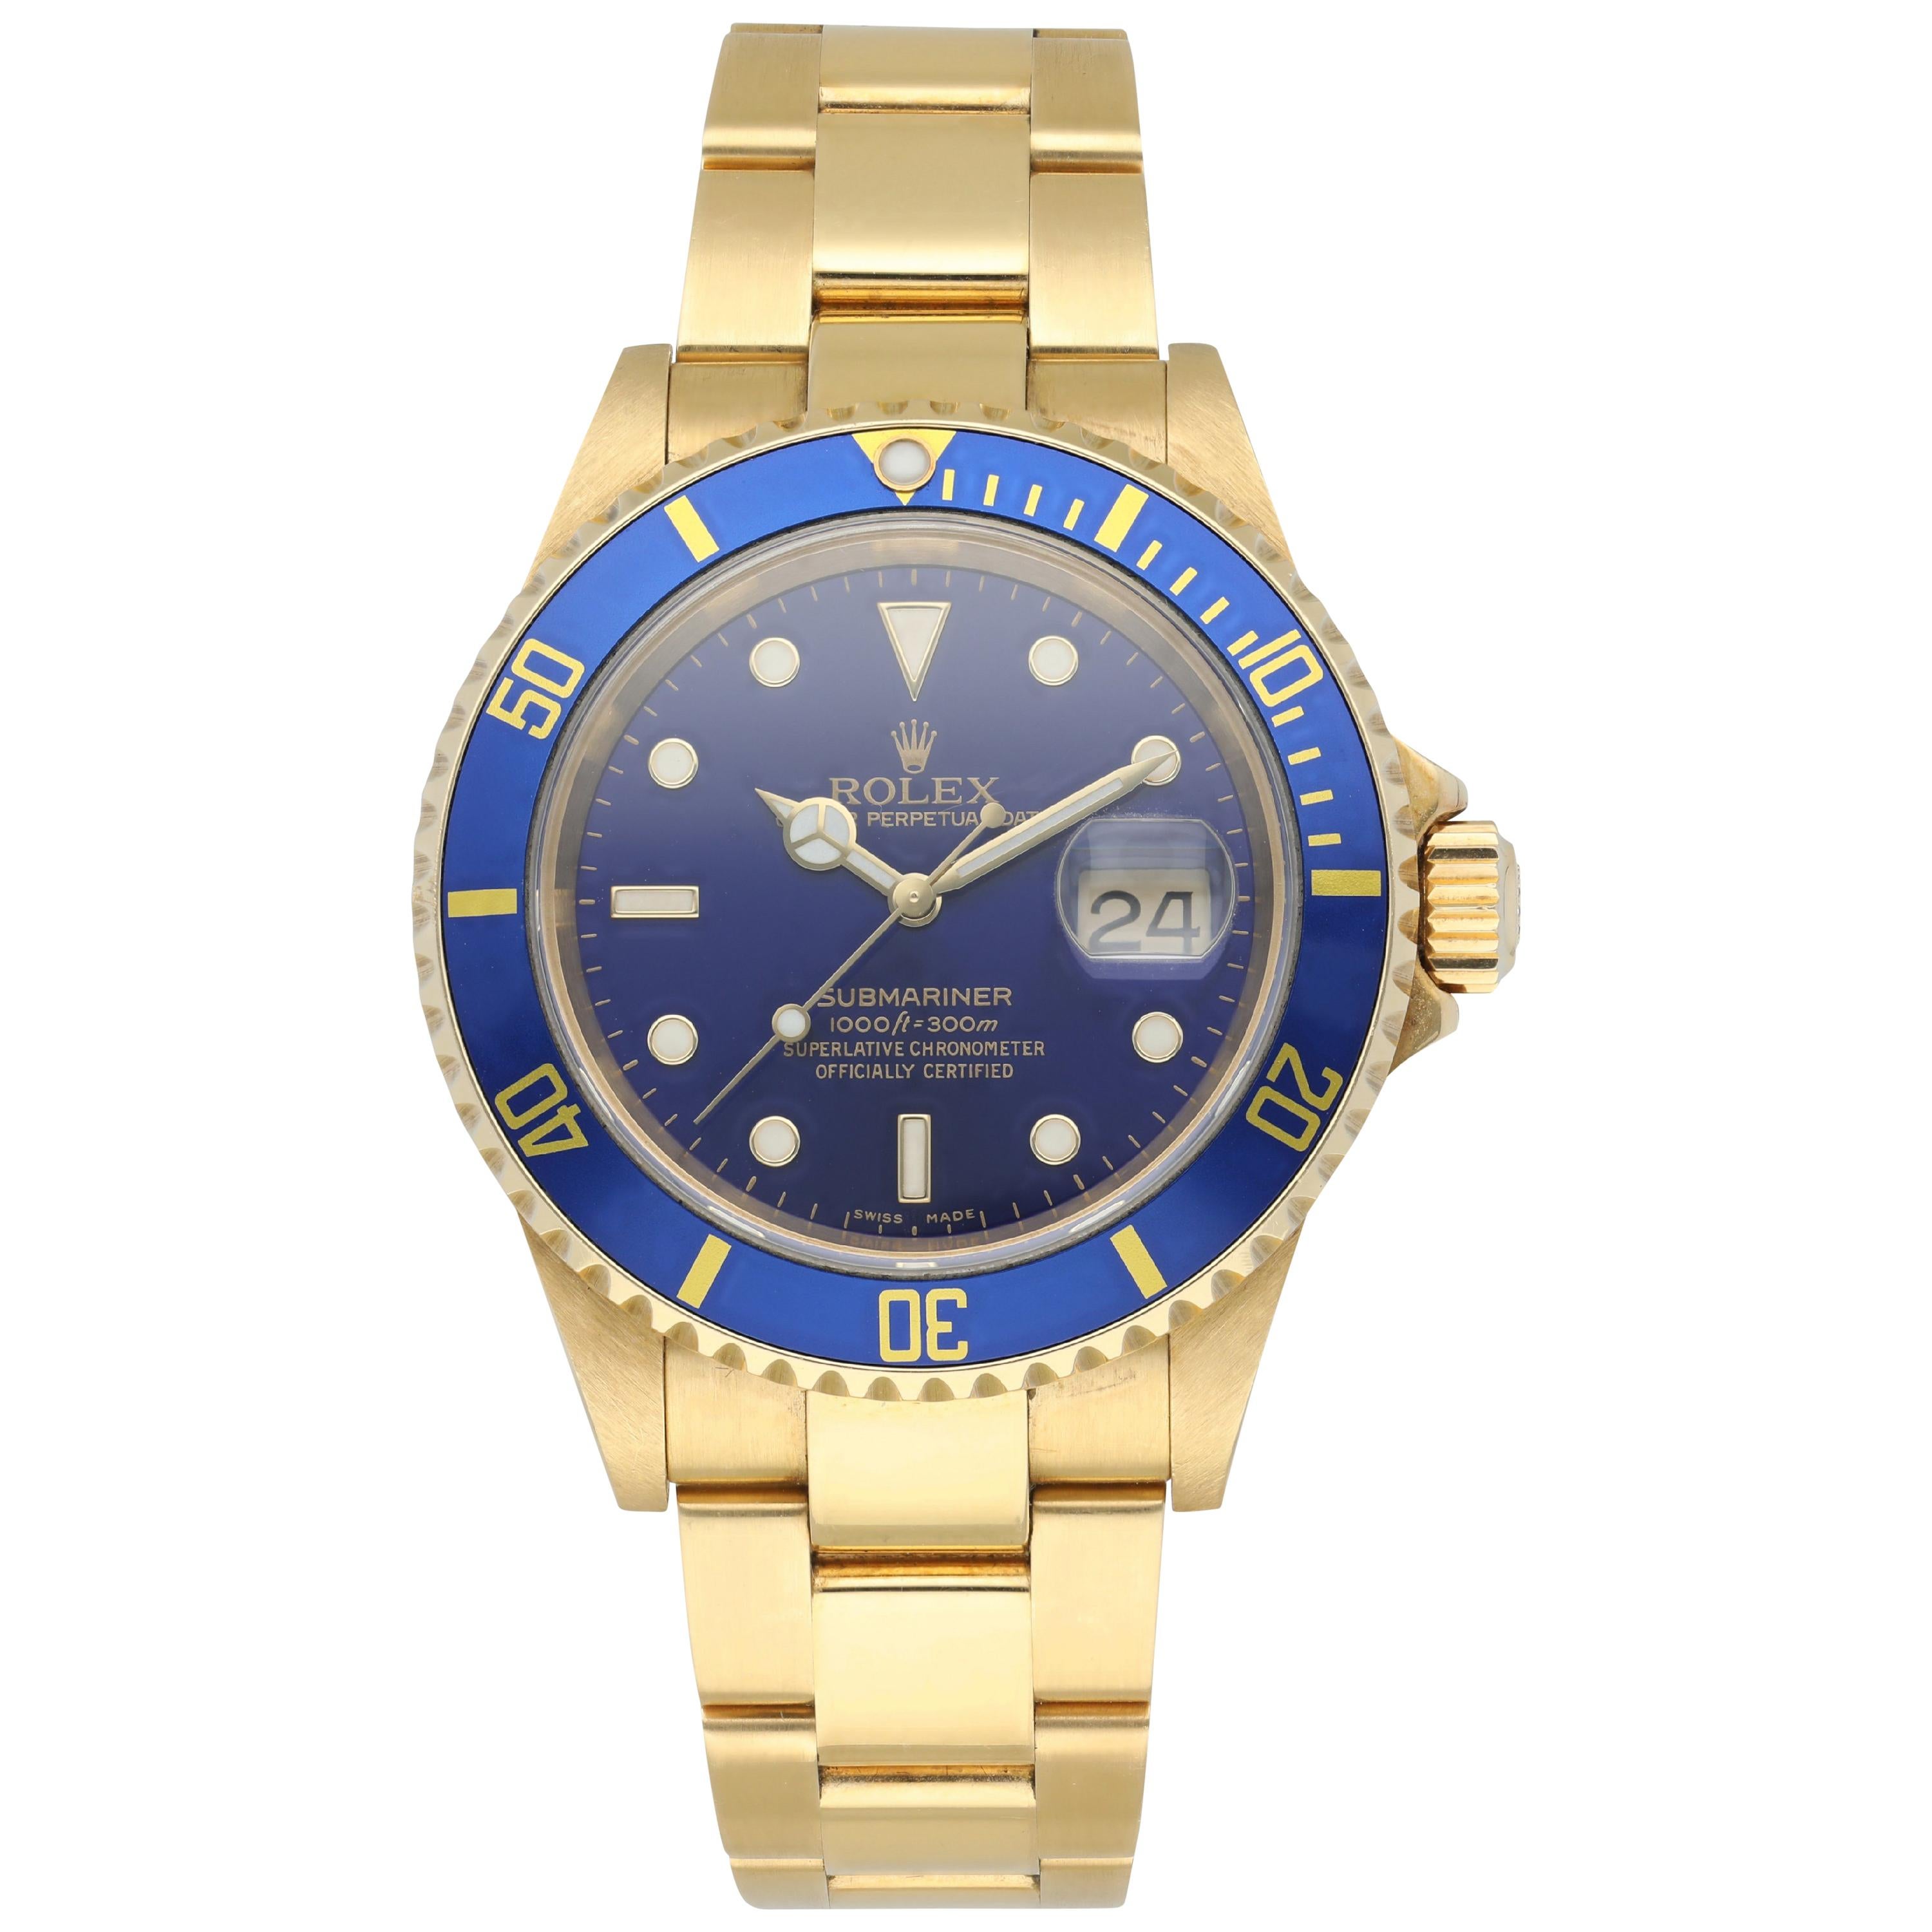 Rolex Submariner 16618T Yellow Gold Men's Watch For Sale